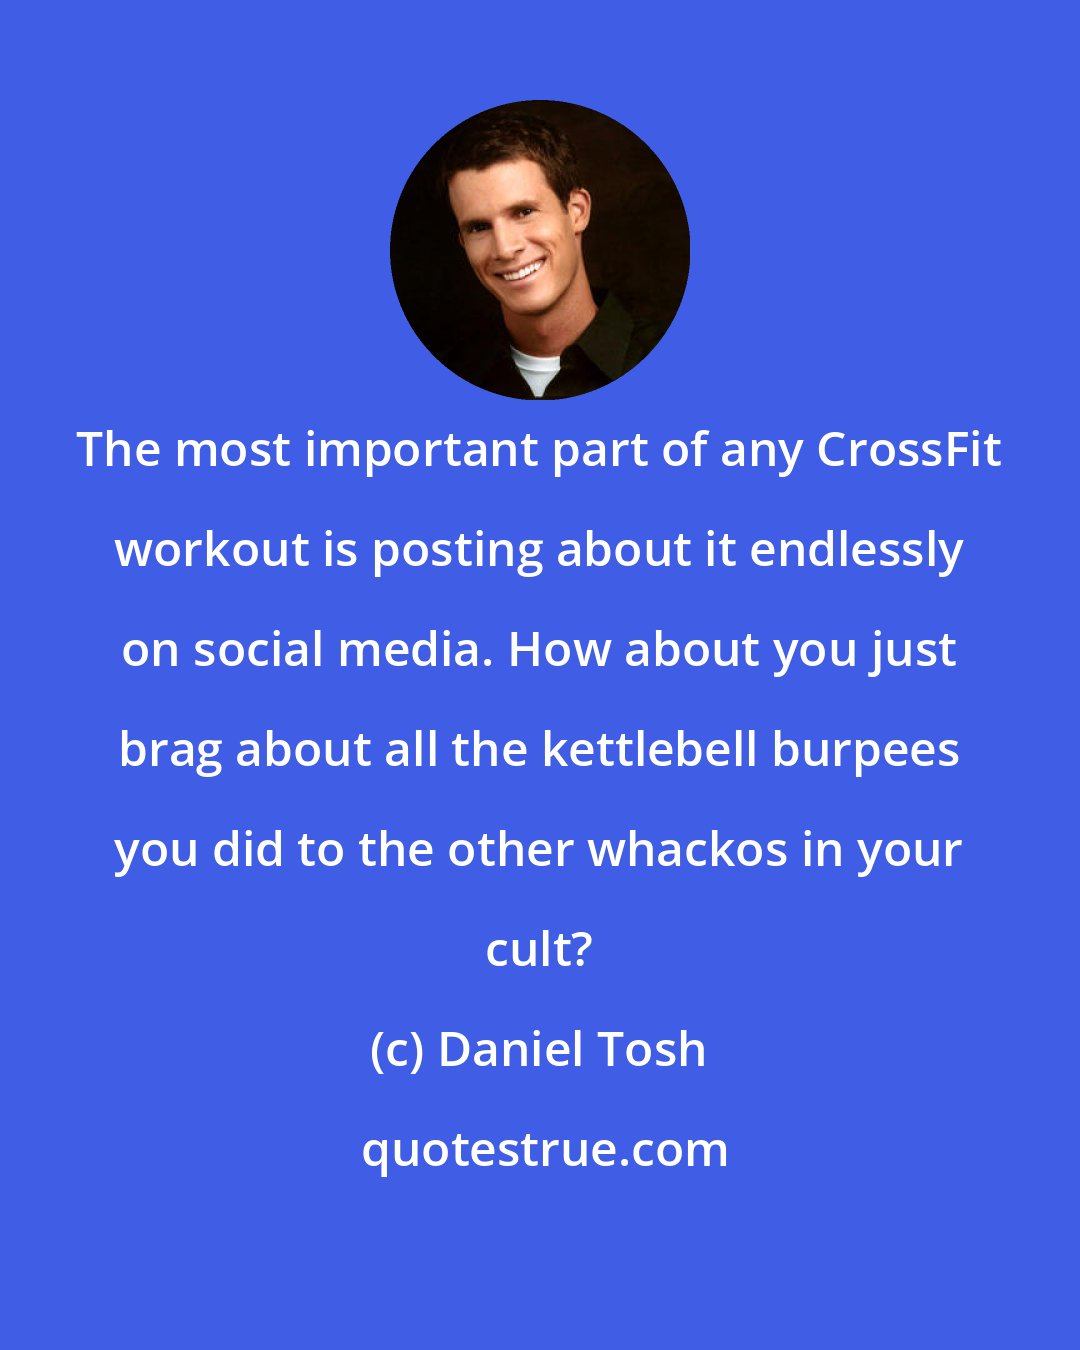 Daniel Tosh: The most important part of any CrossFit workout is posting about it endlessly on social media. How about you just brag about all the kettlebell burpees you did to the other whackos in your cult?